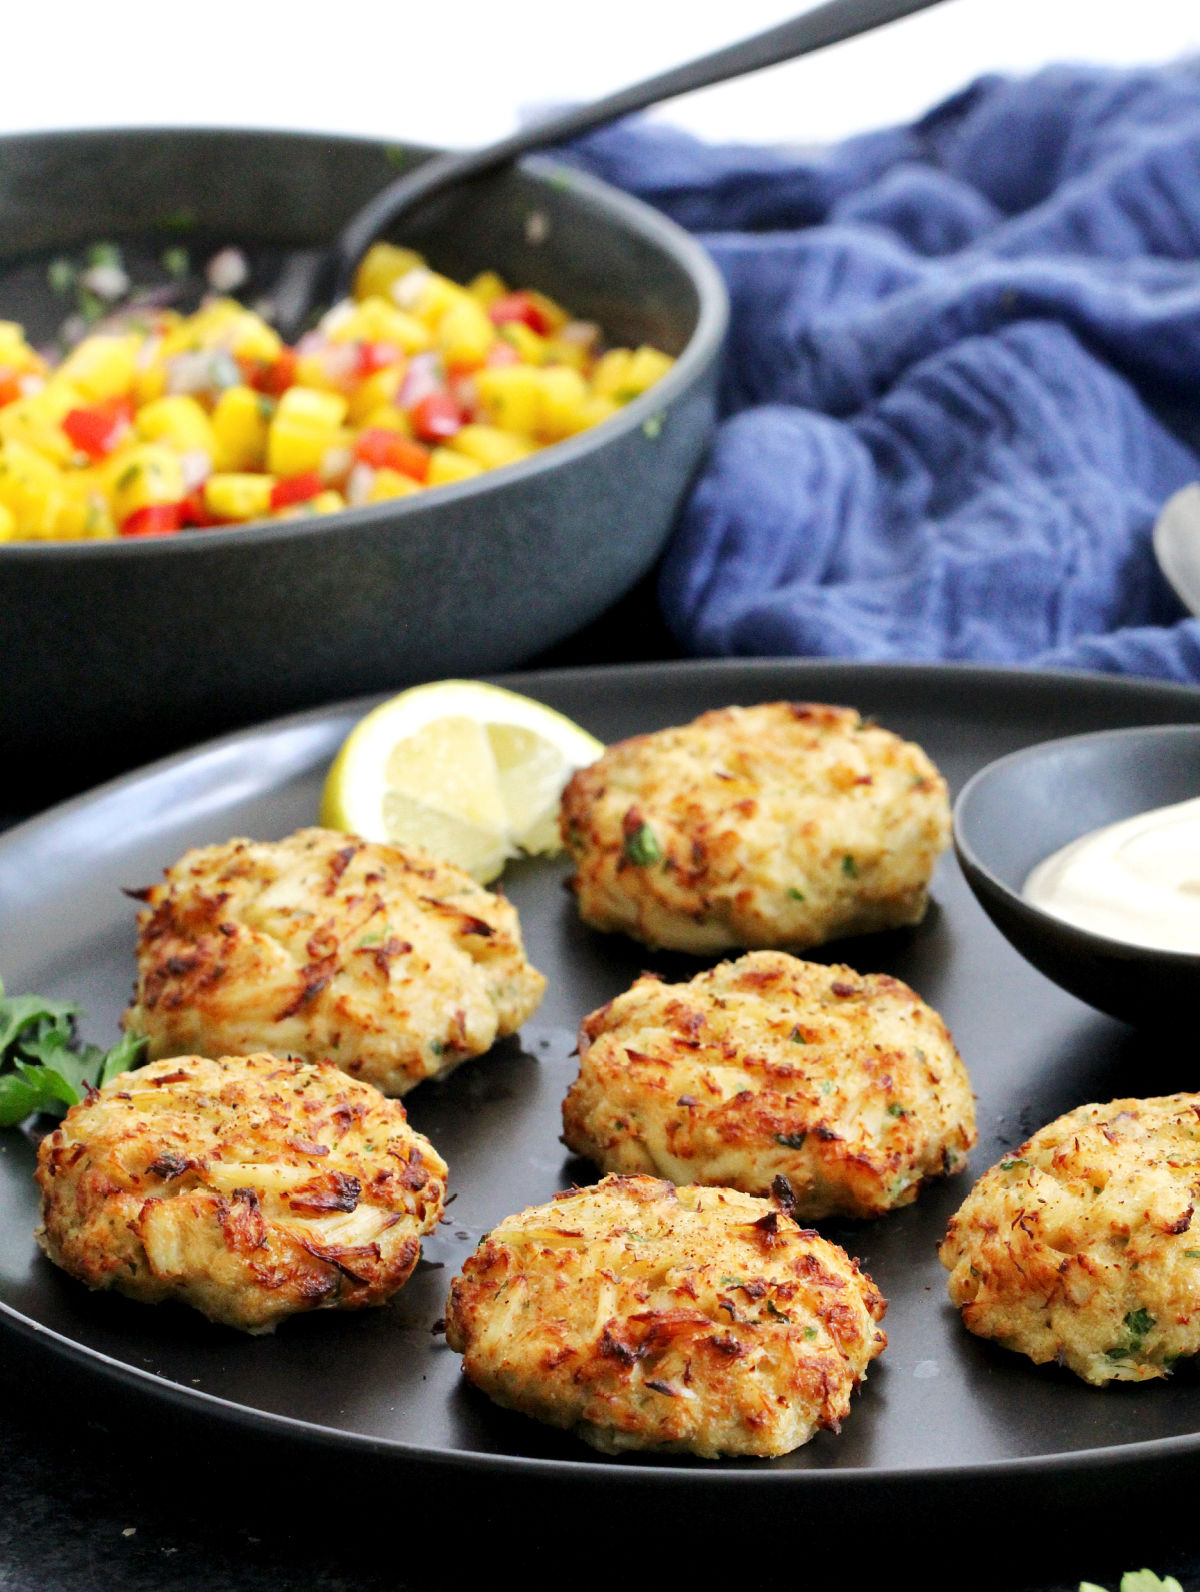 Maryland-style Old Bay crab cakes on a black plate with a bowl of mango salsa in the background.